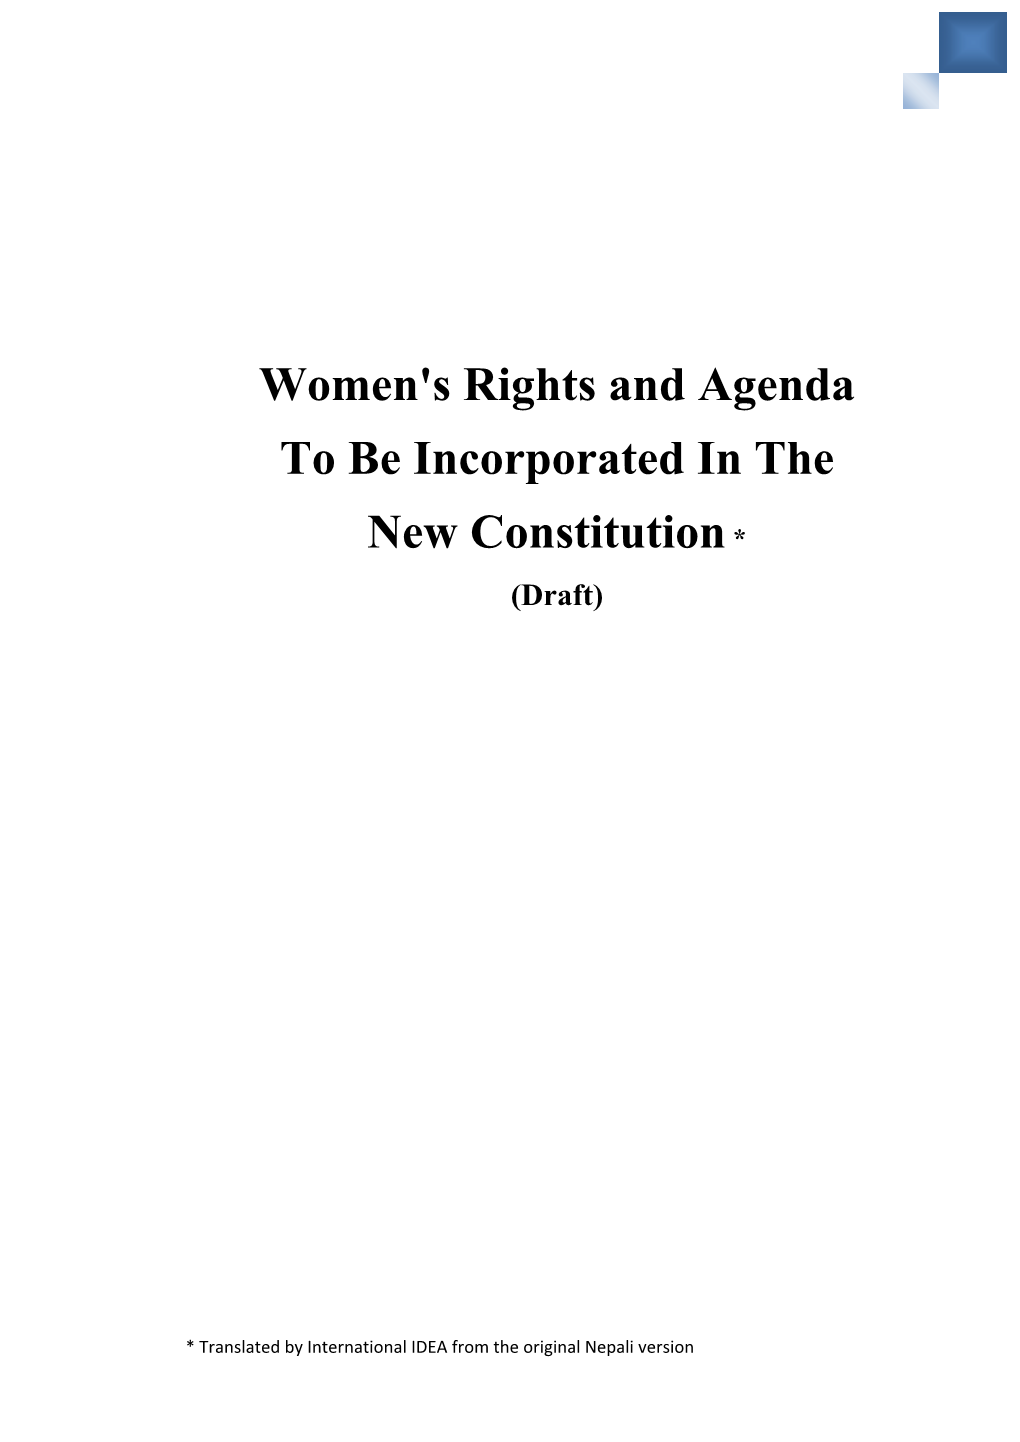 Women's Rights and Agenda to Be Incorporated in the New Constitution